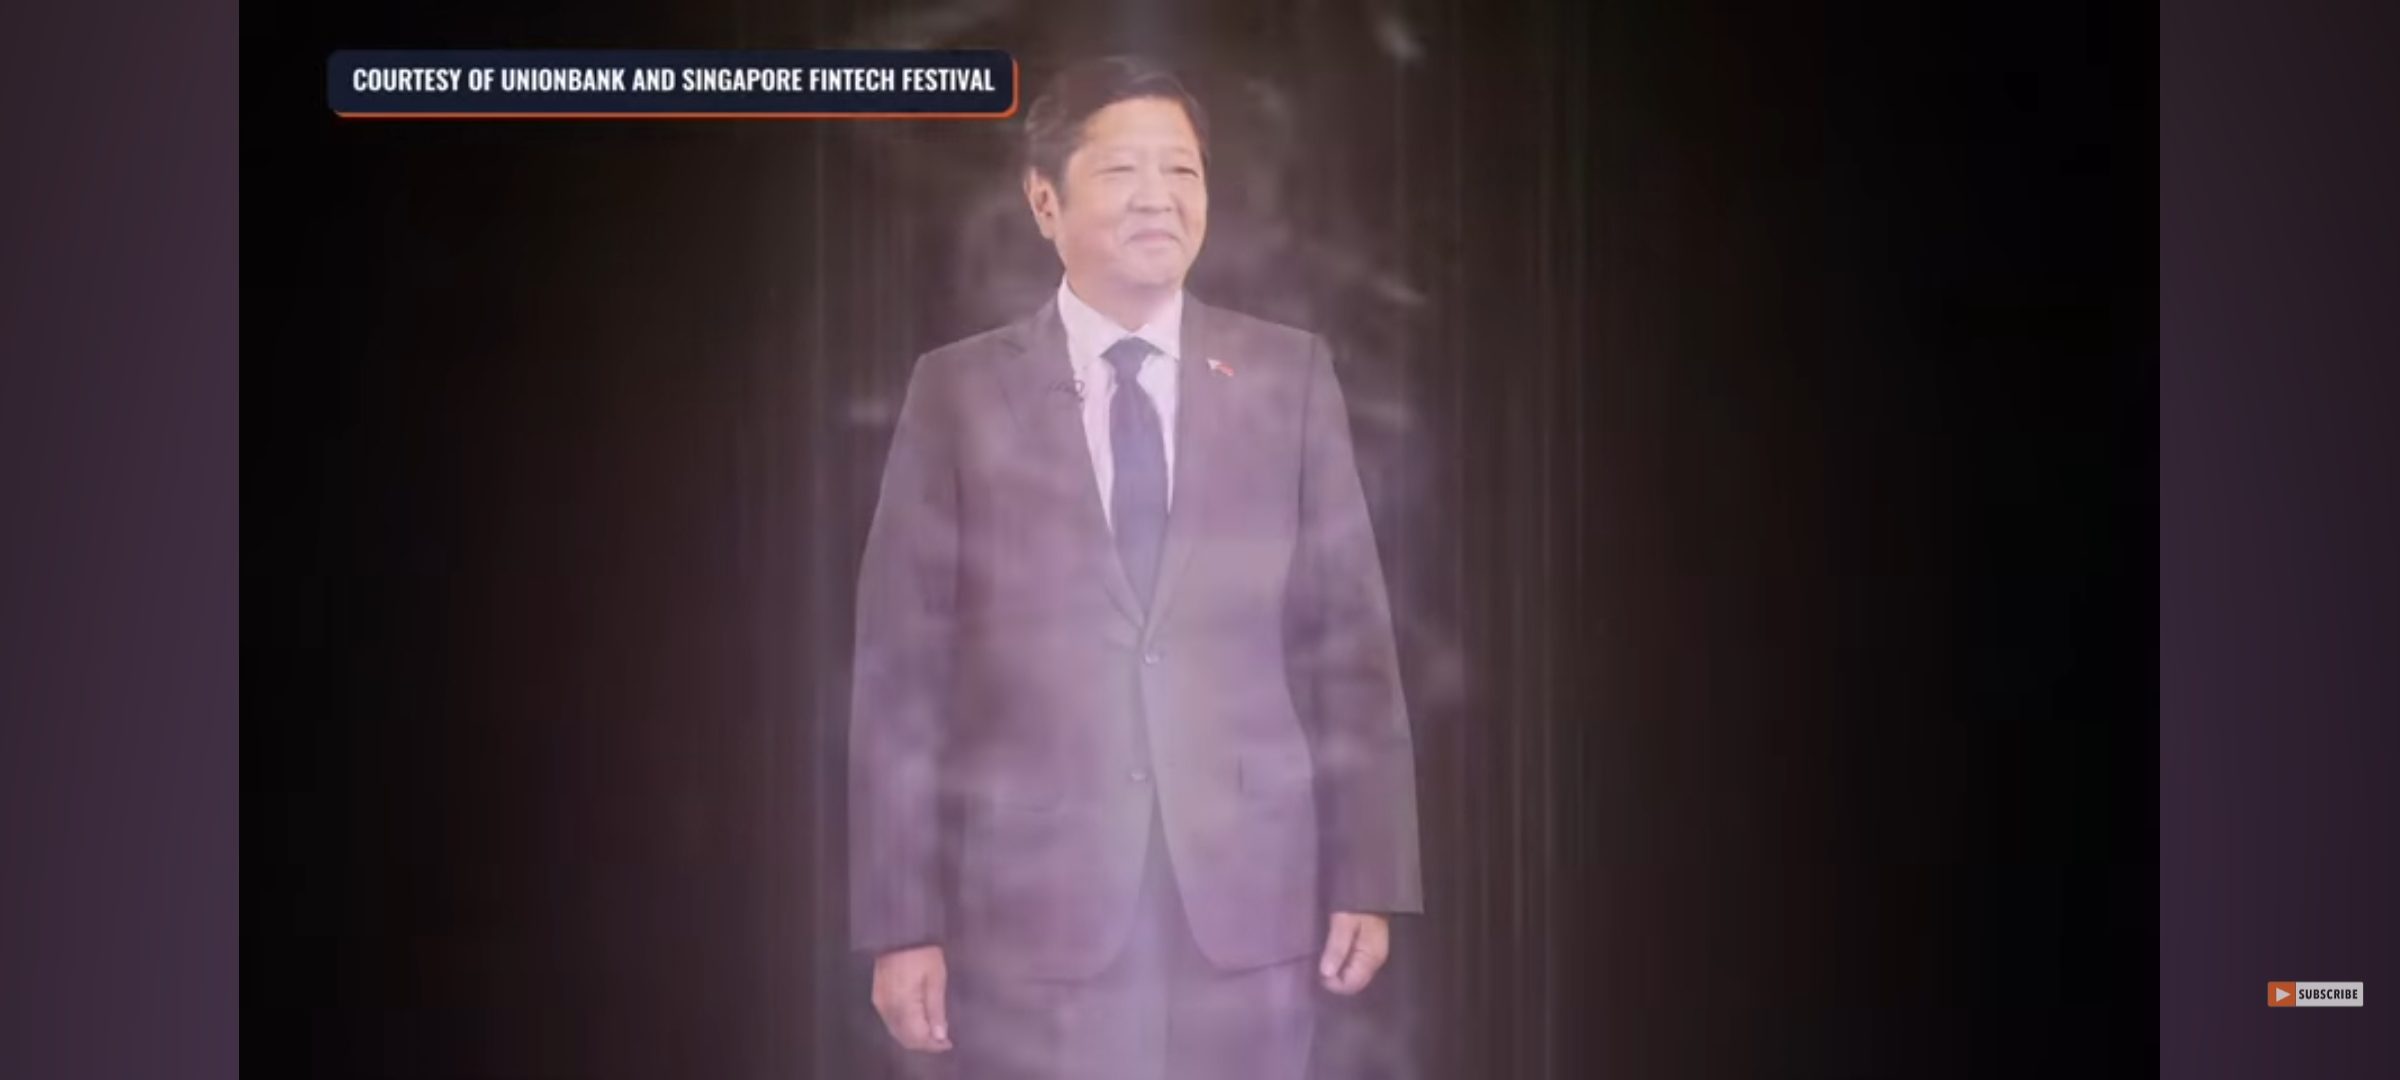 WATCH: Marcos delivers speech in Singapore via hologram while in US